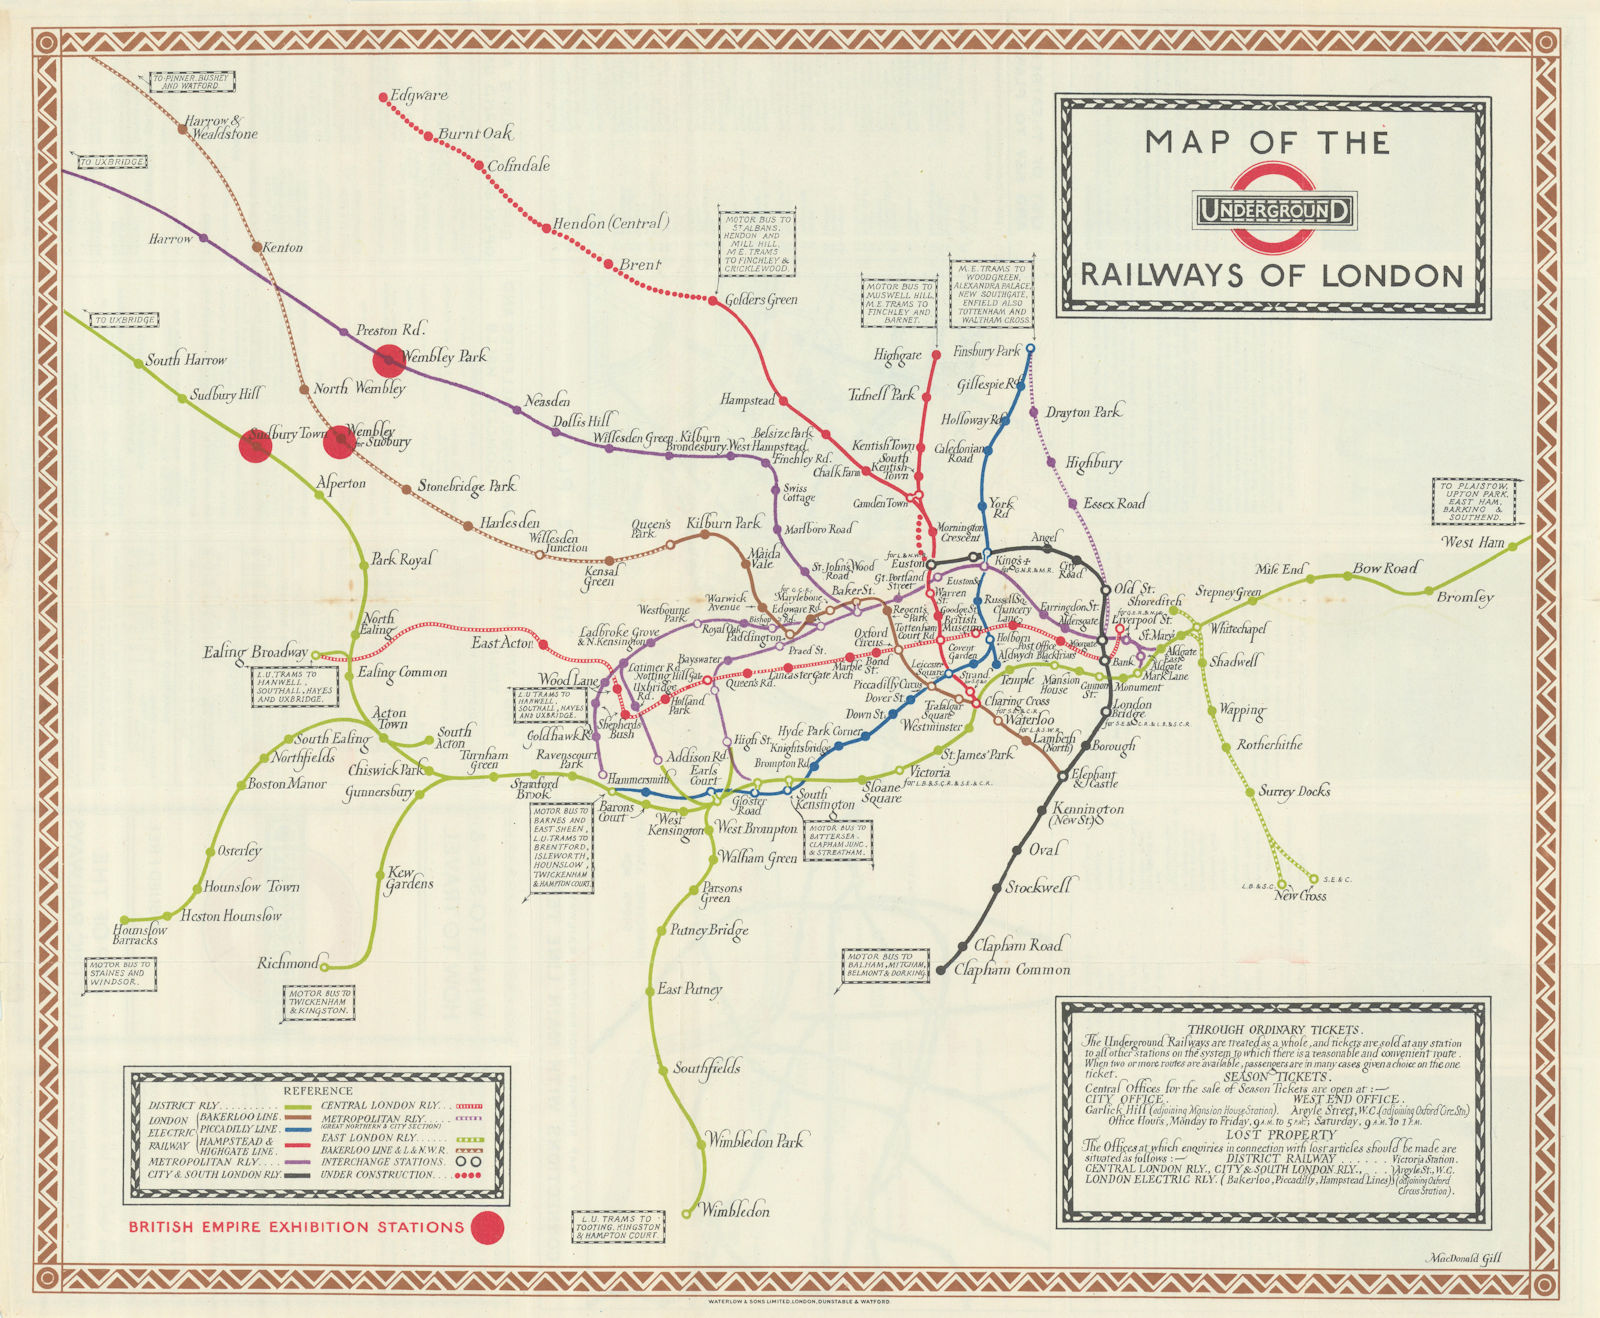 Map of the Underground Railways of London by Macdonald Gill. January 1923